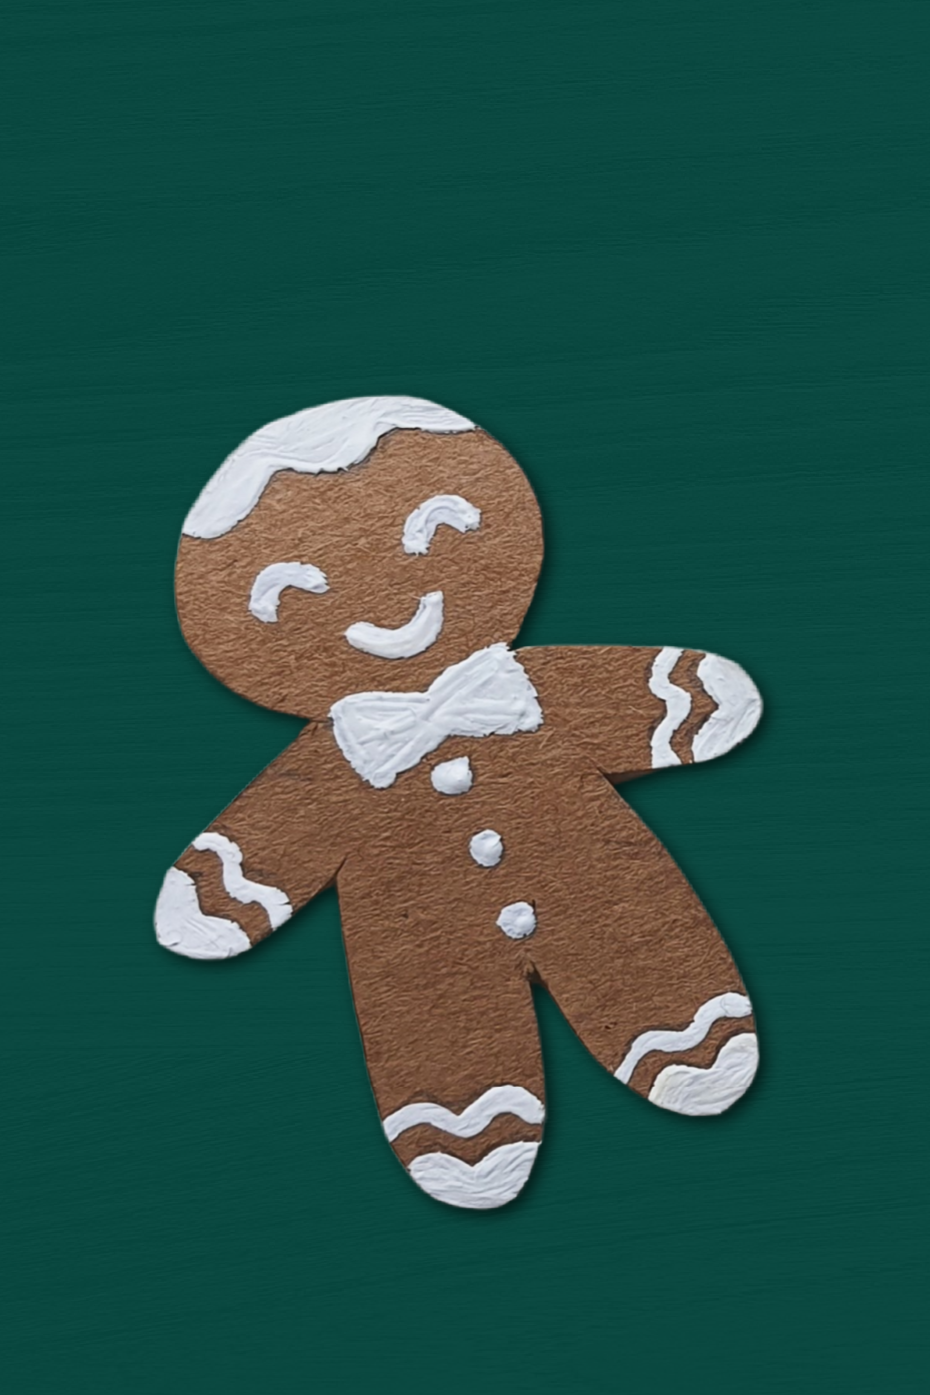 paper gingerbreadman ornament on a green background